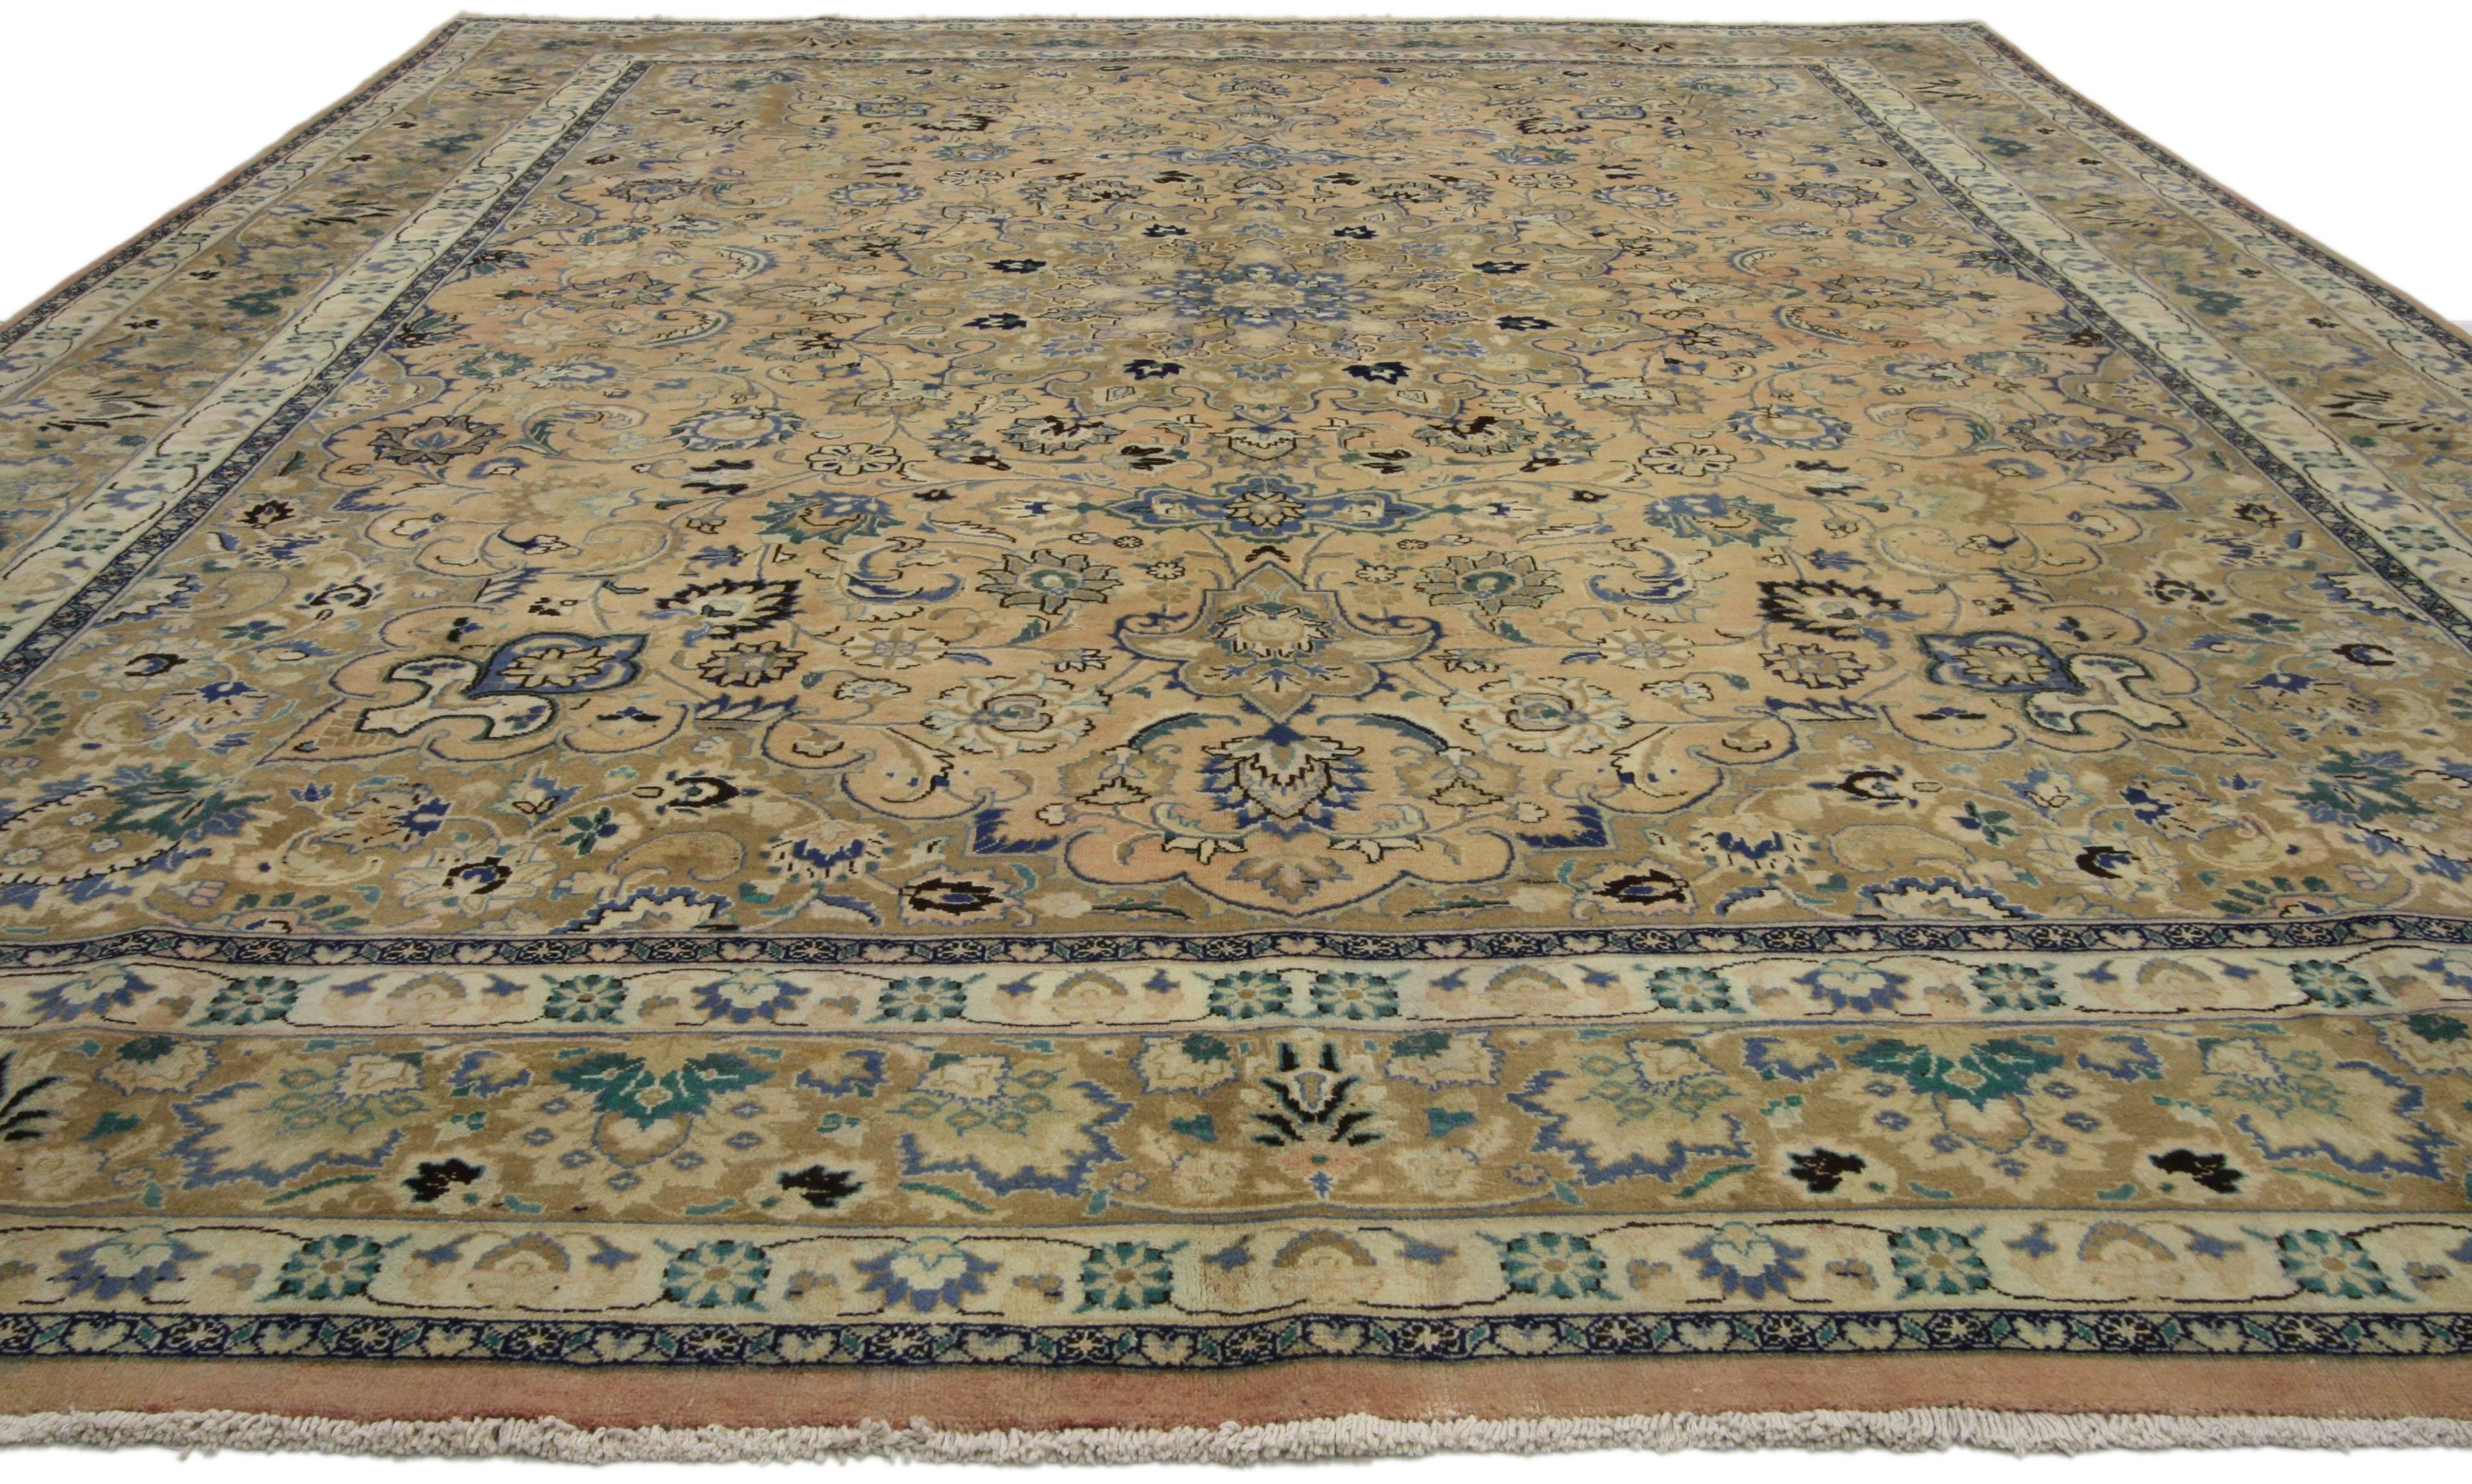 76440, vintage Persian Khorassan rug with traditional style. This hand-knotted wool vintage Persian Khorassan area rug features elaborate cusped spandrels and a sixteen-point starburst medallion with palmette finials, both with arabesque swirling